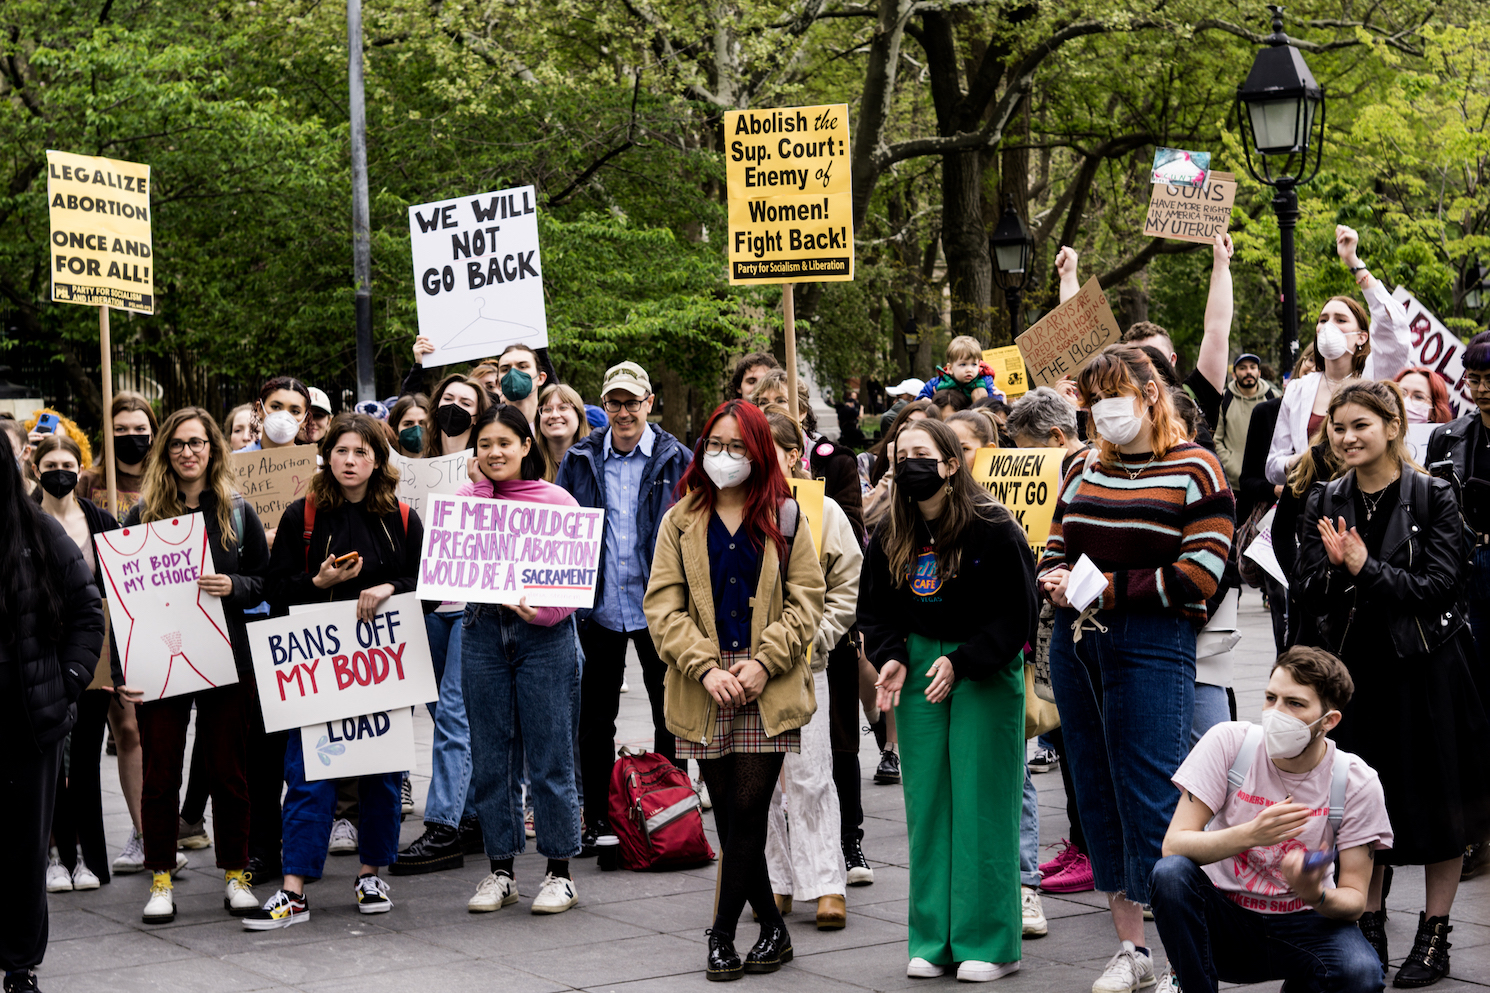 Thousands+rally+for+abortion+rights+across+NYC+in+wake+of+leaked+Roe+ruling